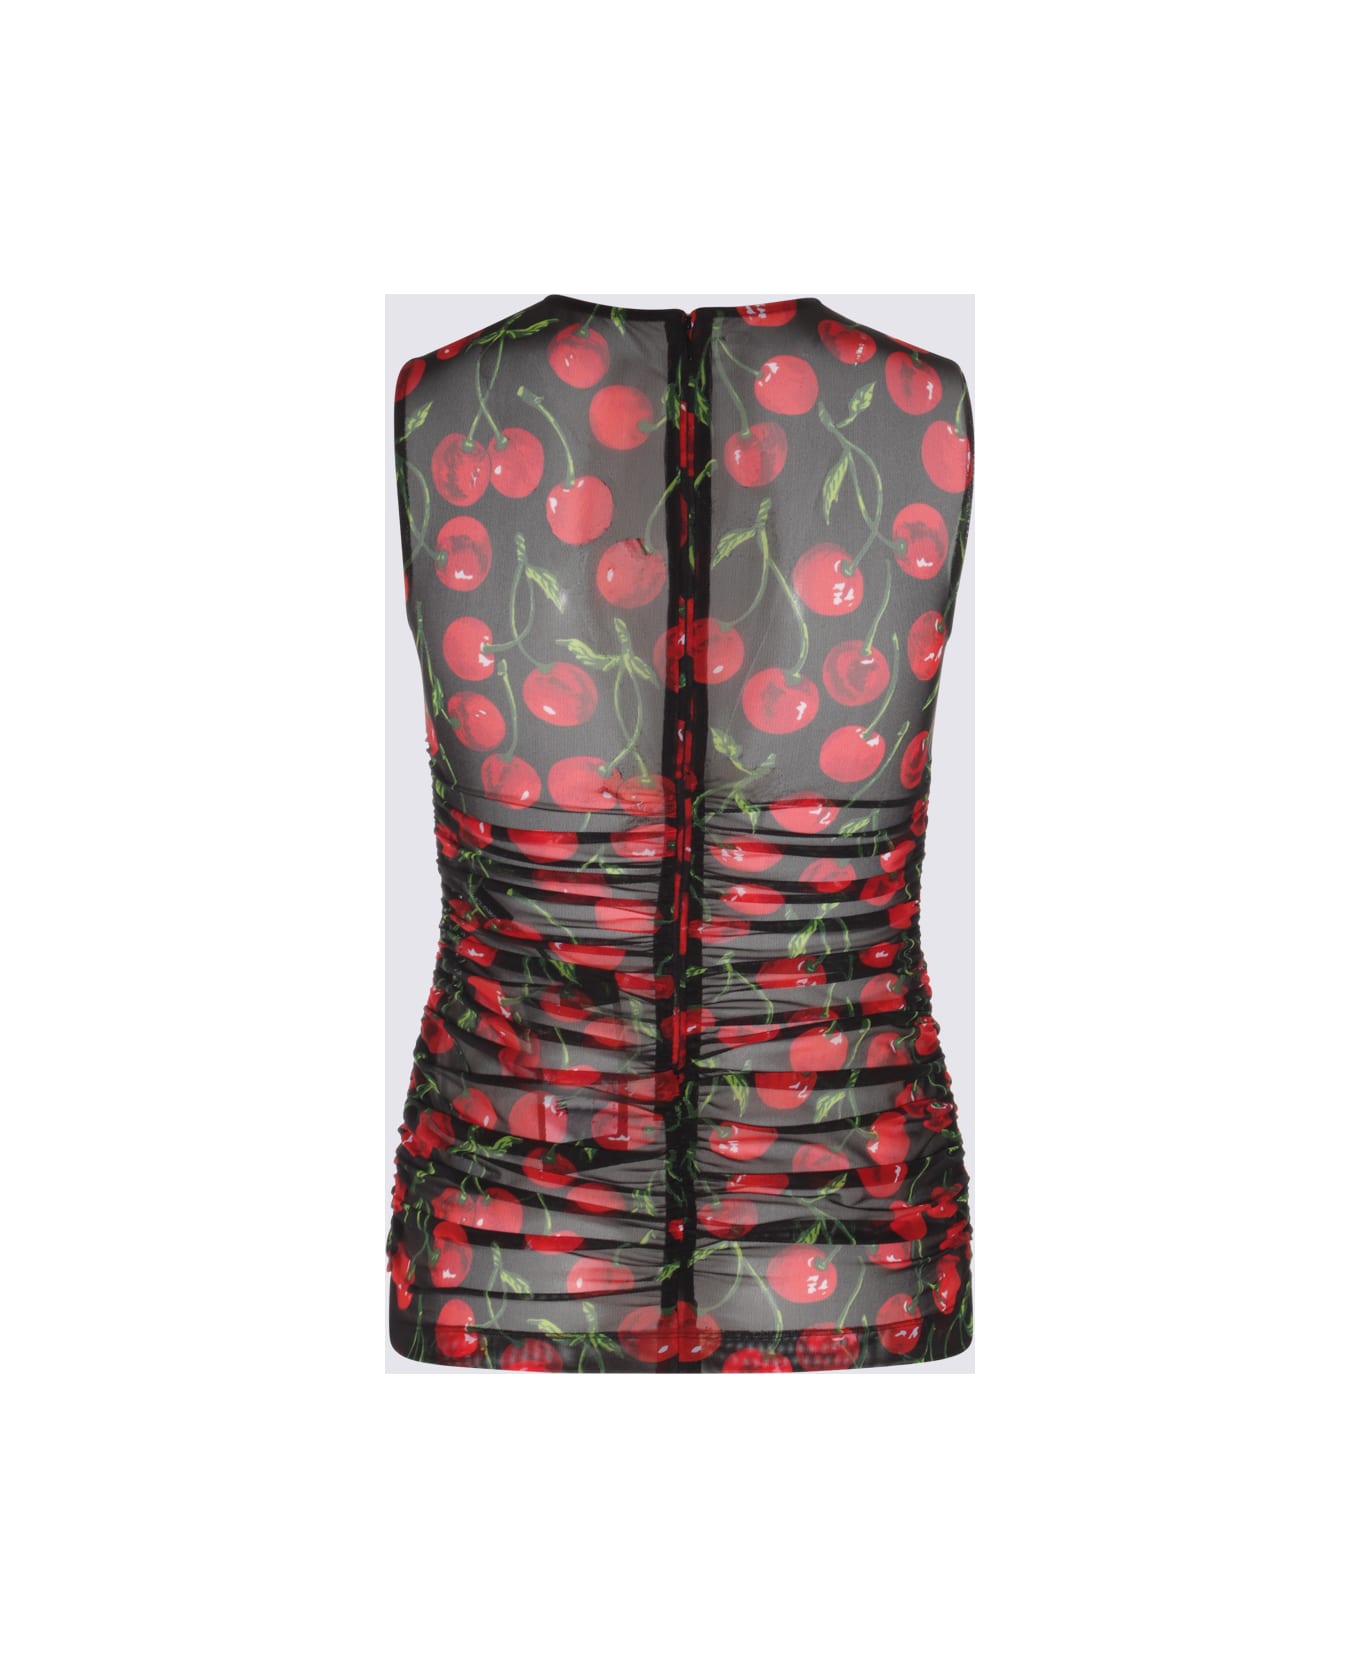 Dolce & Gabbana Black, Red And Green Top - Iy Black Mix